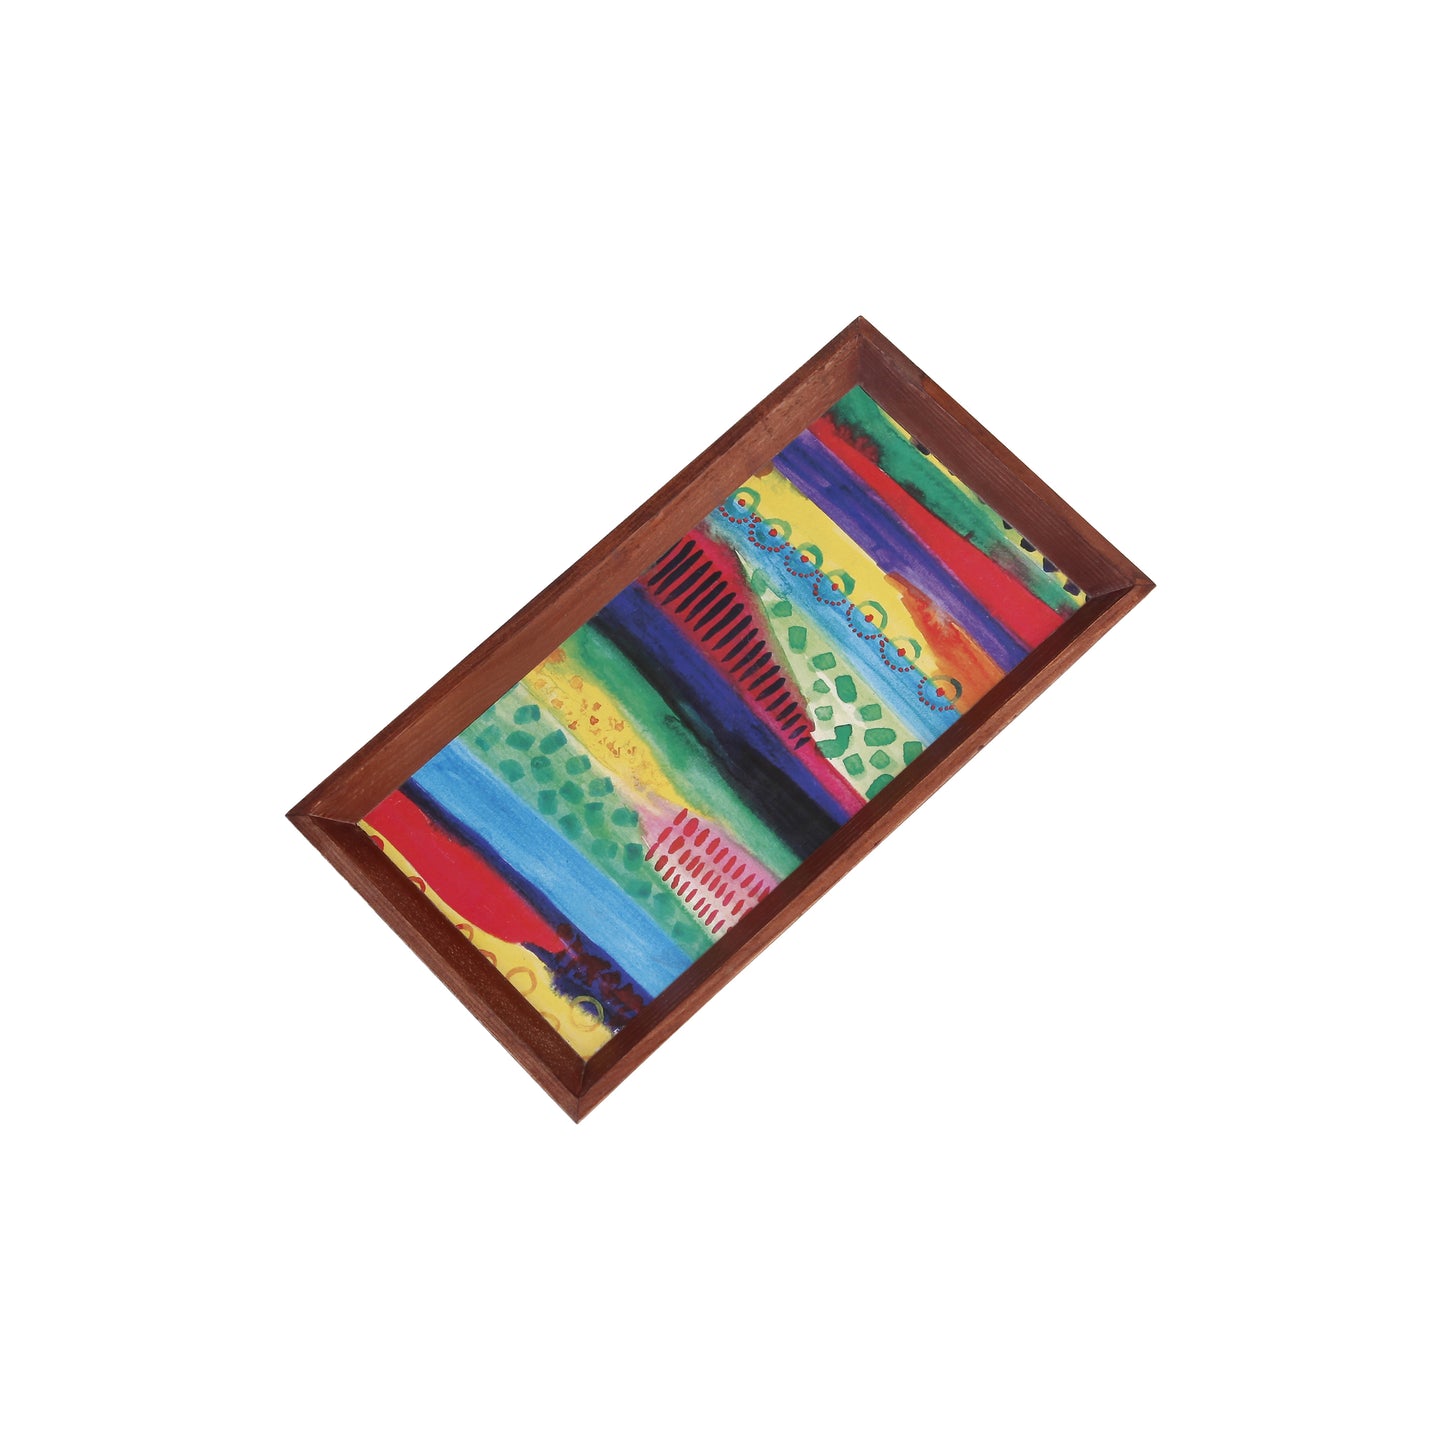 A Tiny Mistake Abstract Lines Rectangle Wooden Serving Tray, 35 x 20 x 2 cm